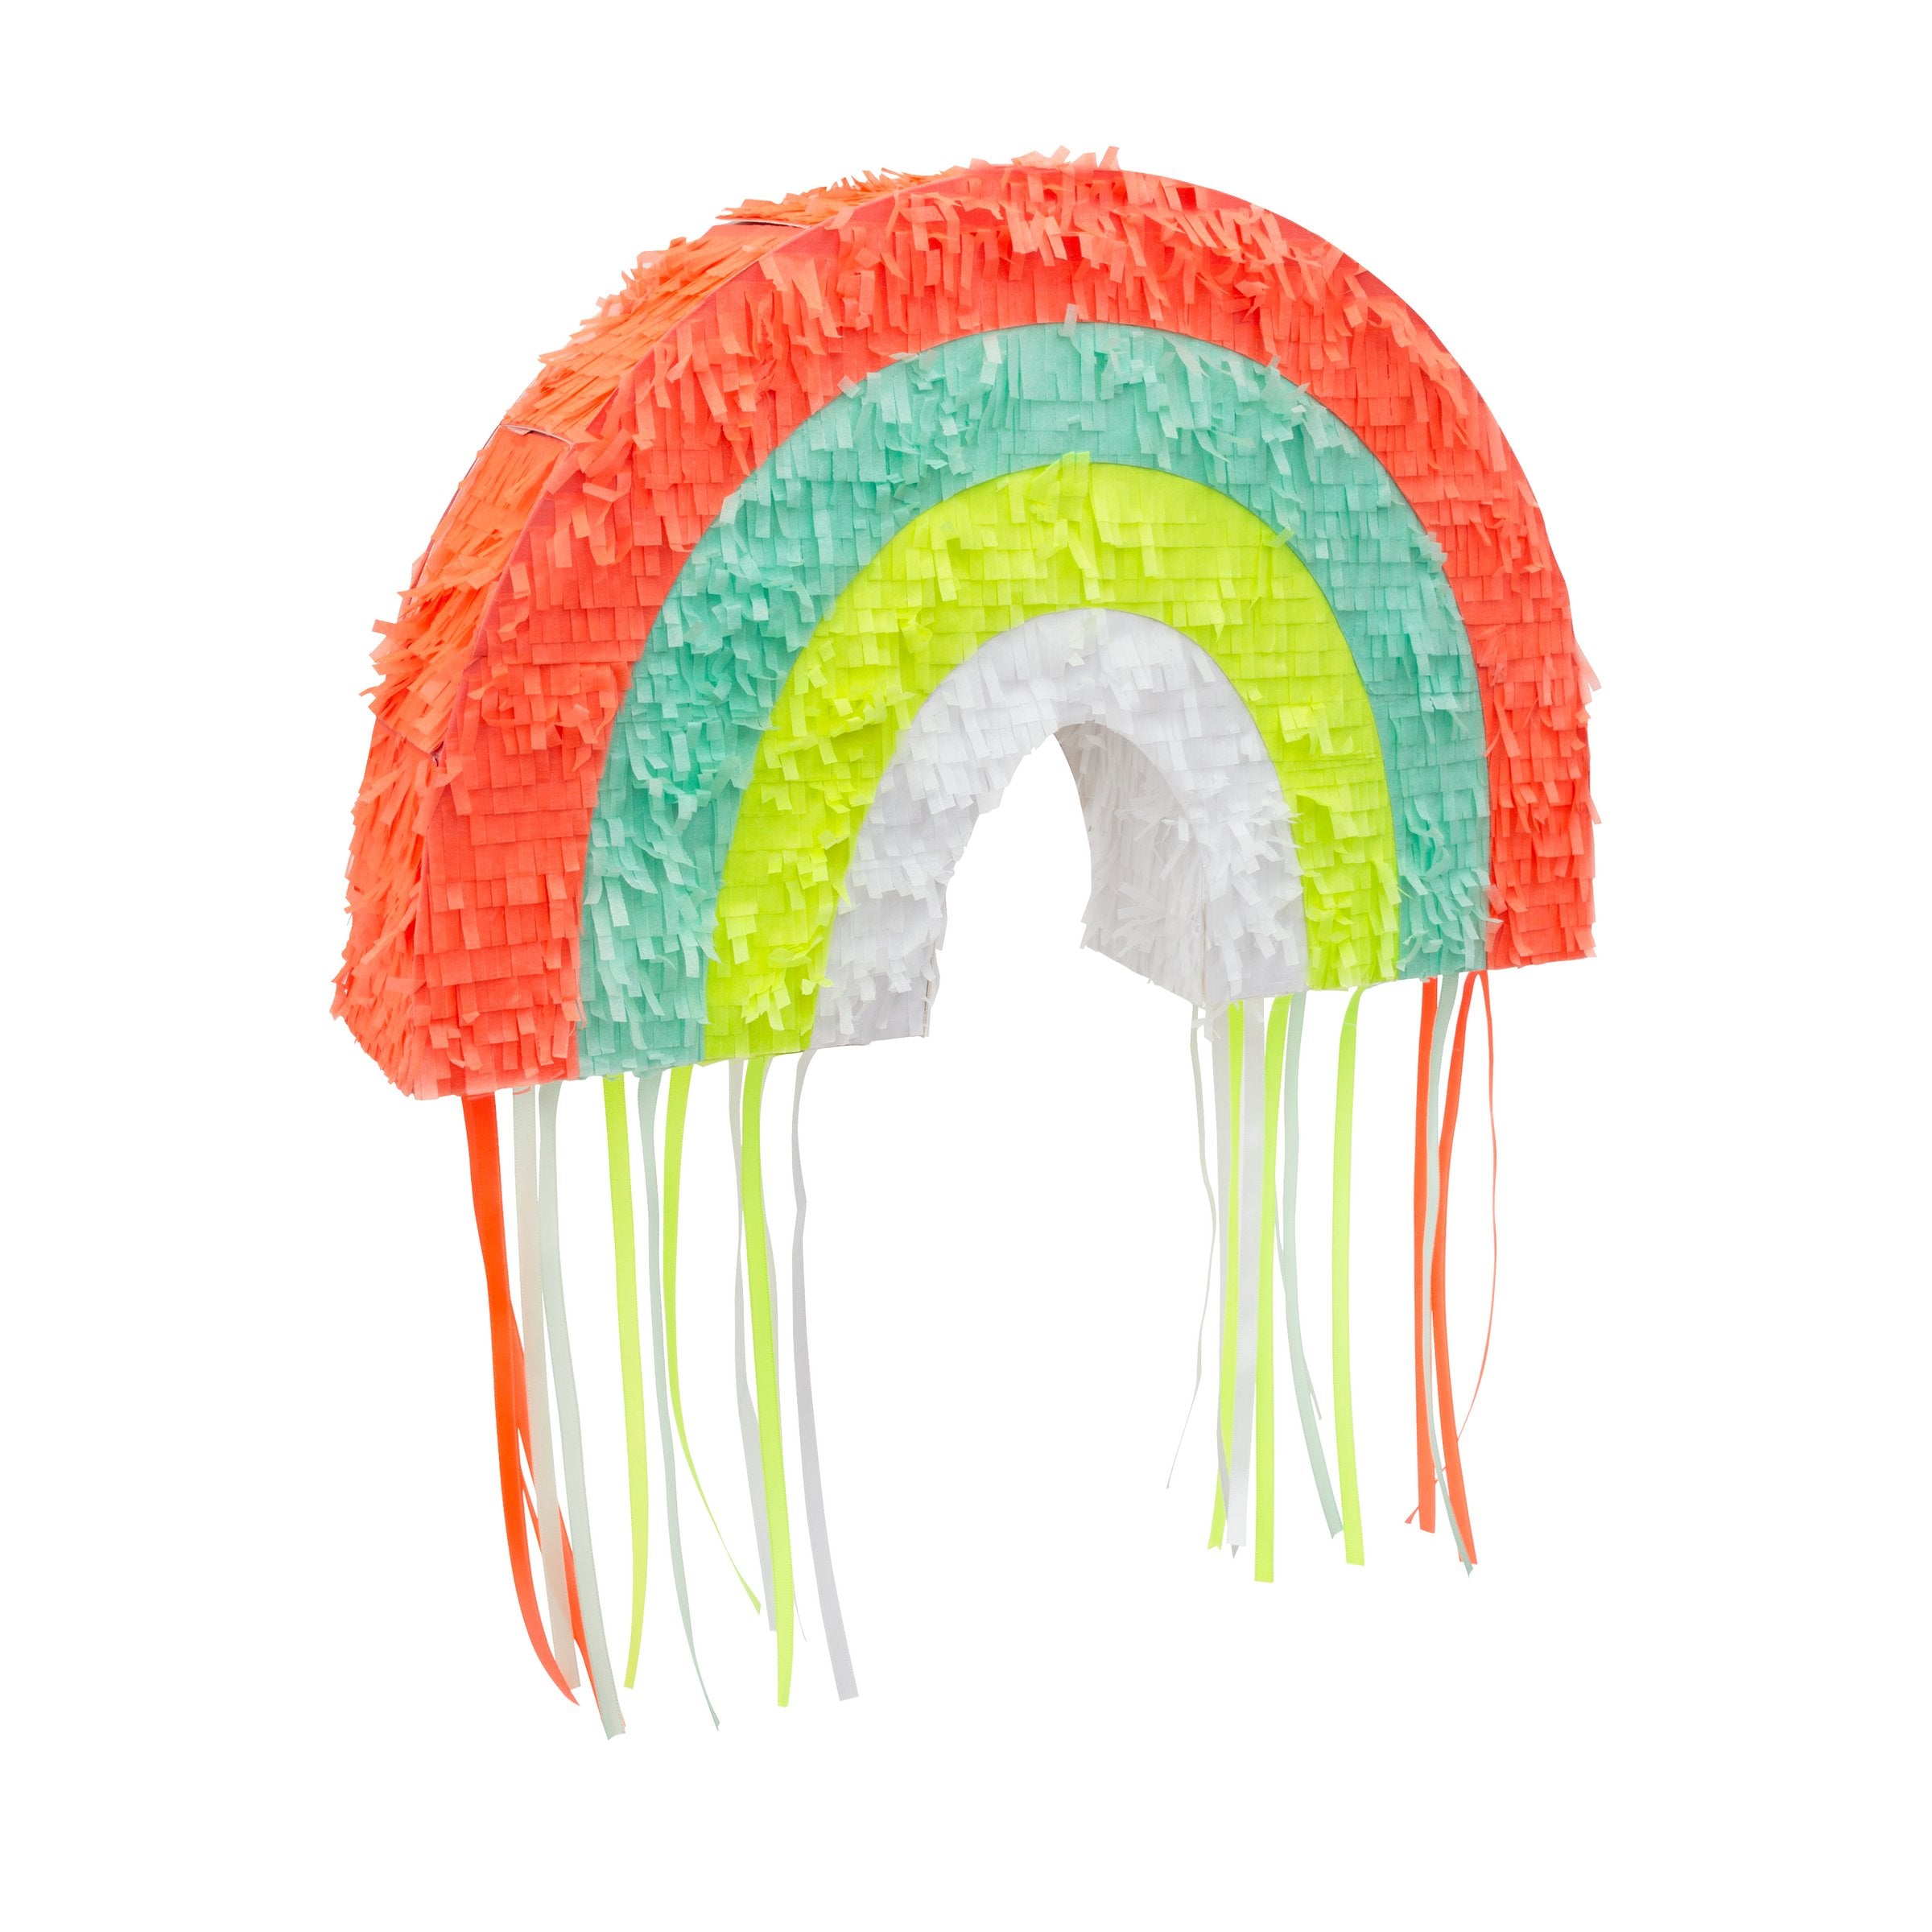 This rainbow pinata is beautifully decorated with colourful stripes and hanging ribbons.